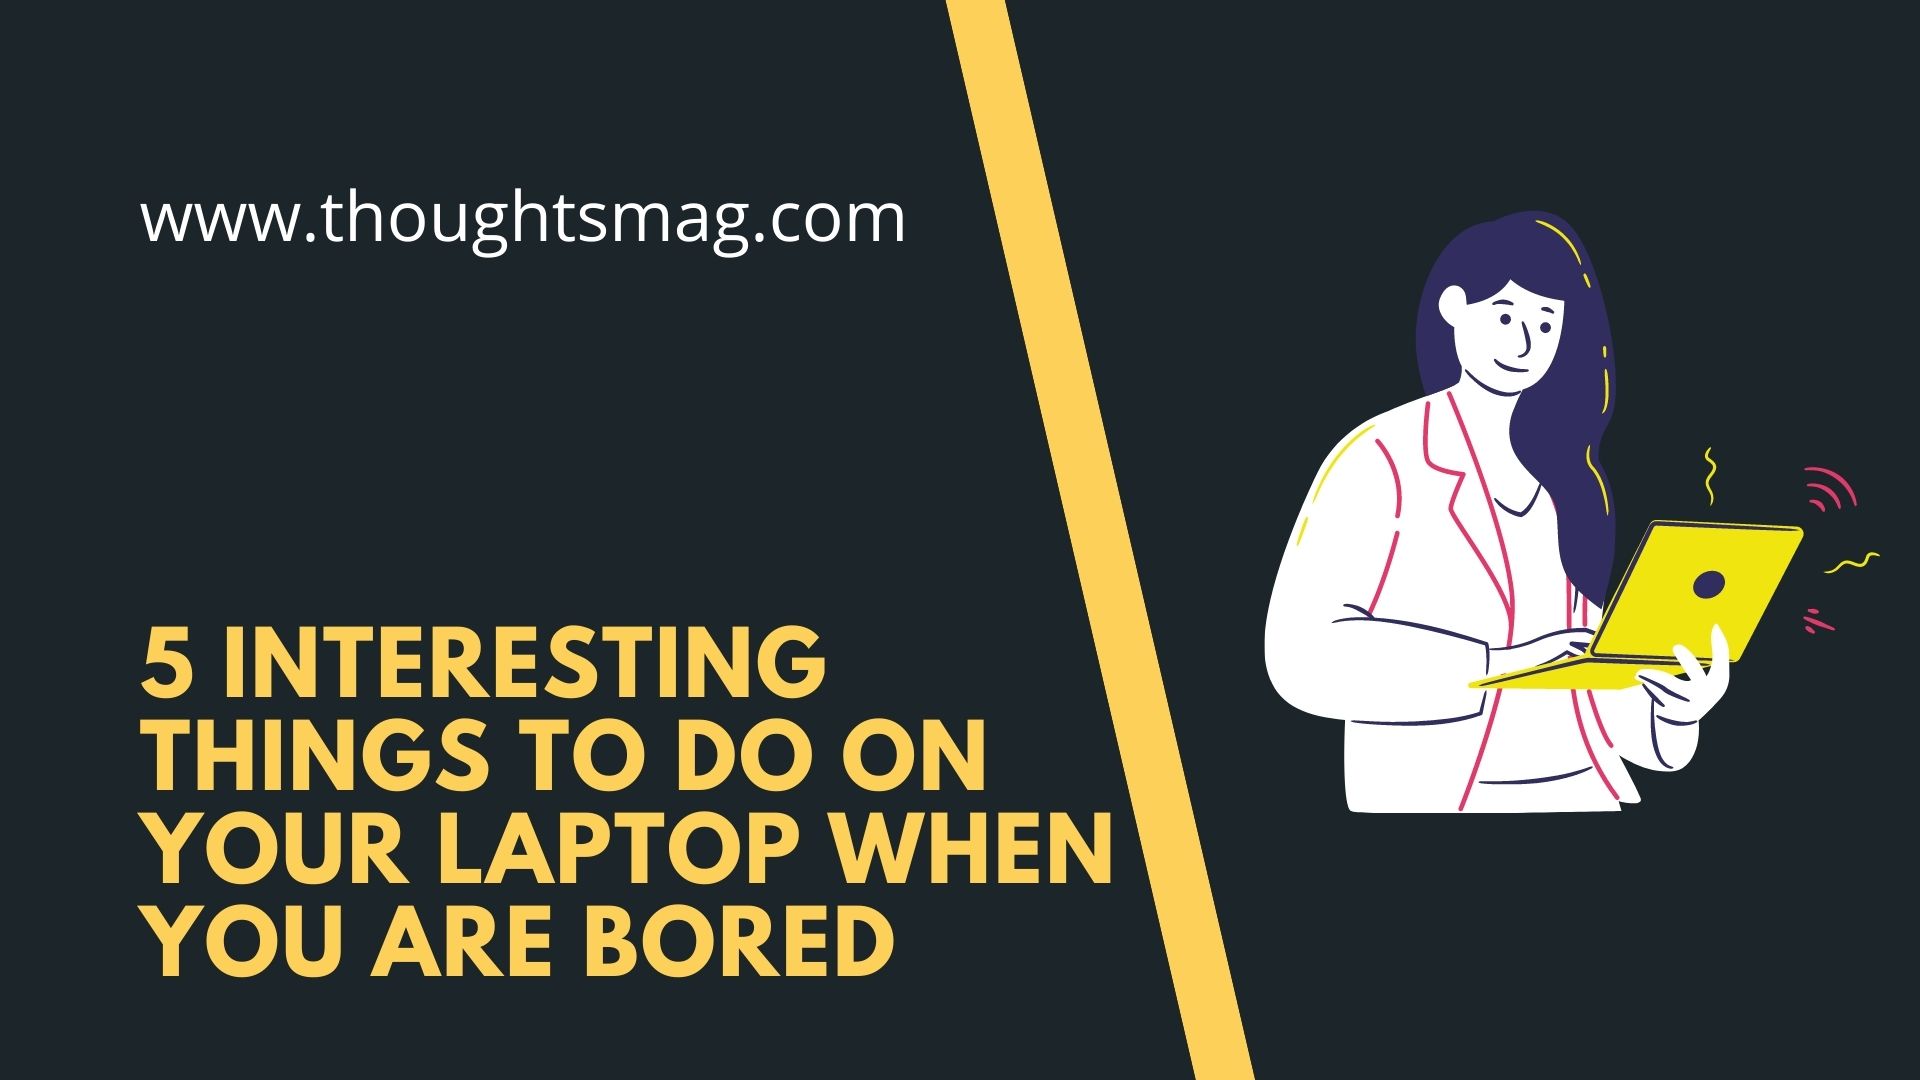 5 Interesting Things To Do On Your Laptop When You are Bored